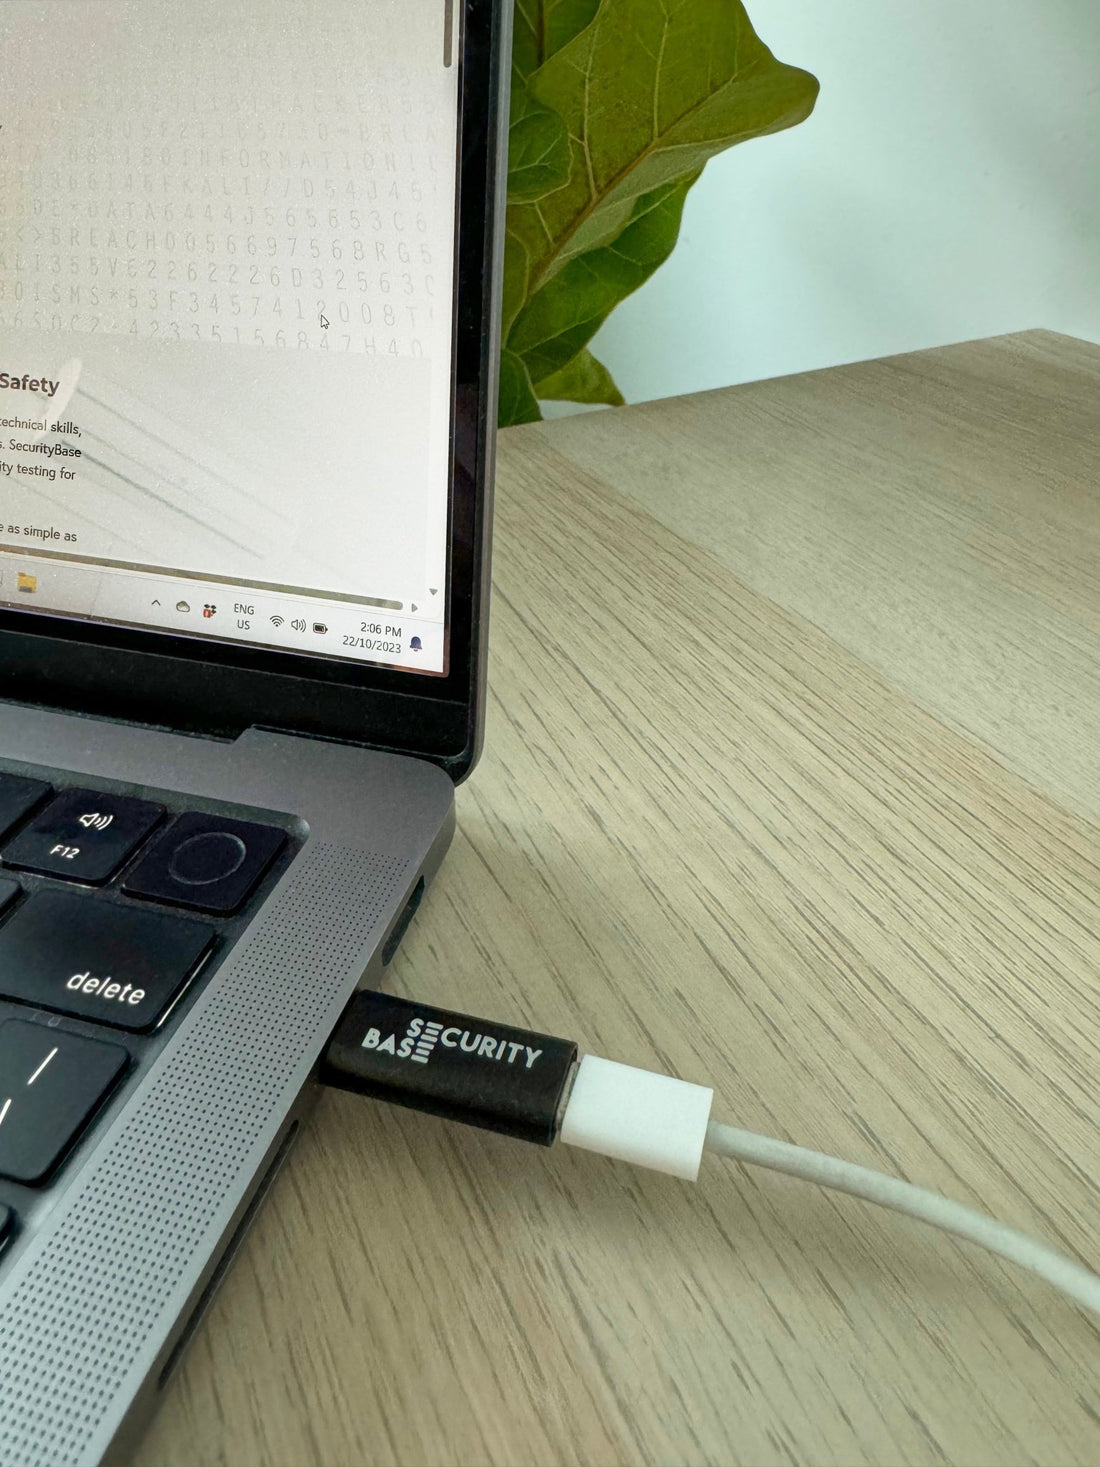 The Essential Guide to USB Data Blockers - Securitybase